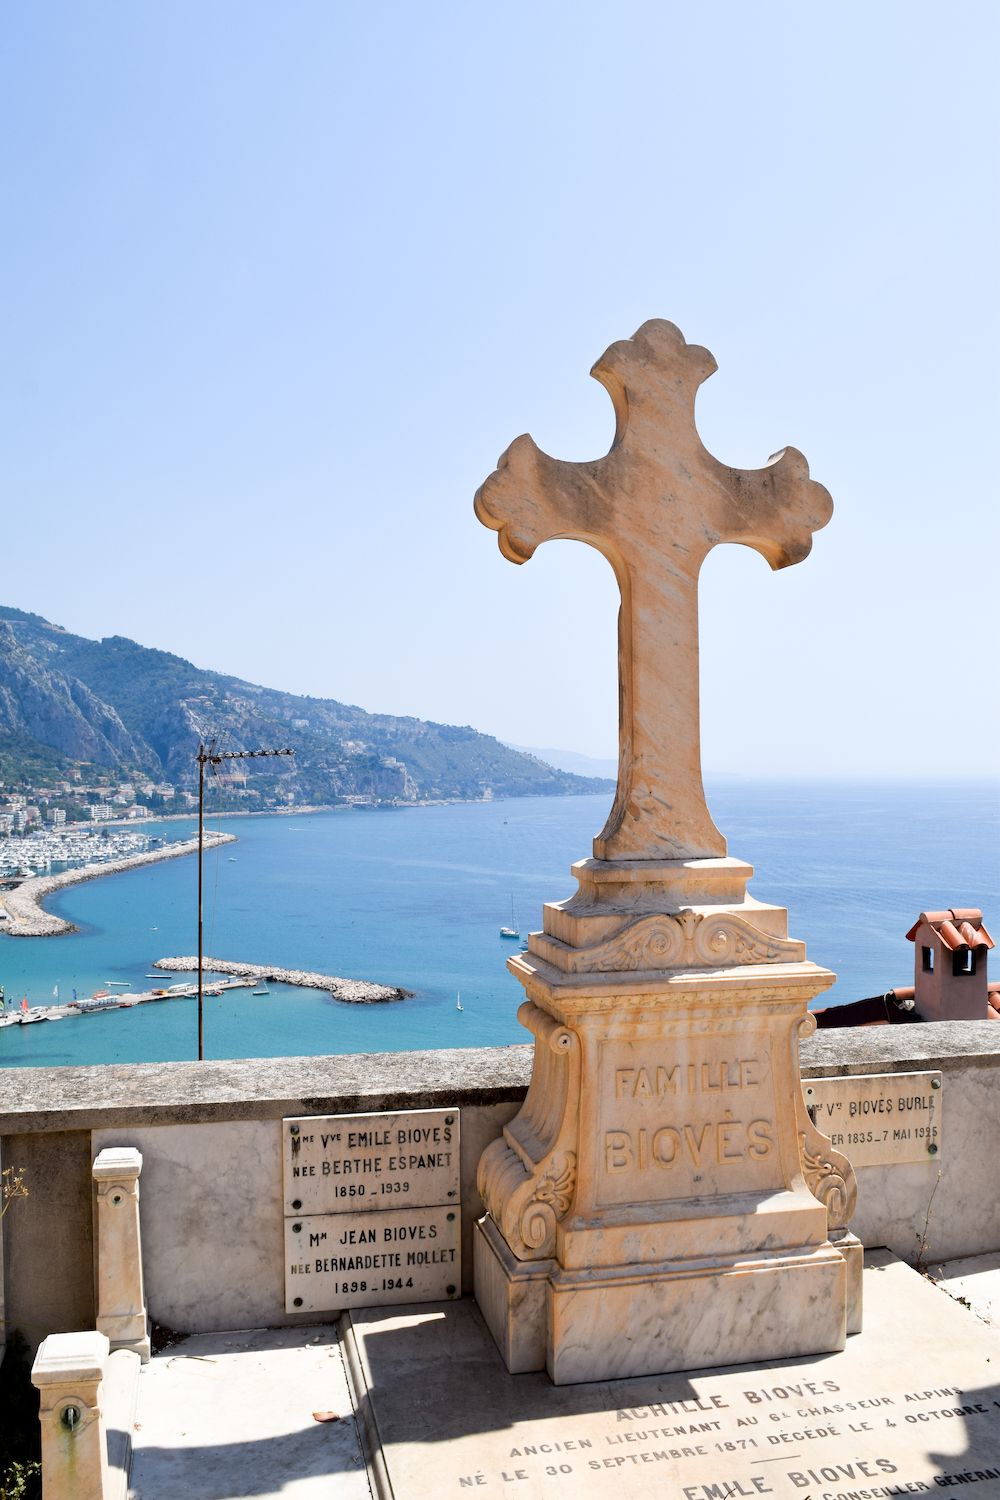 View of Menton, France